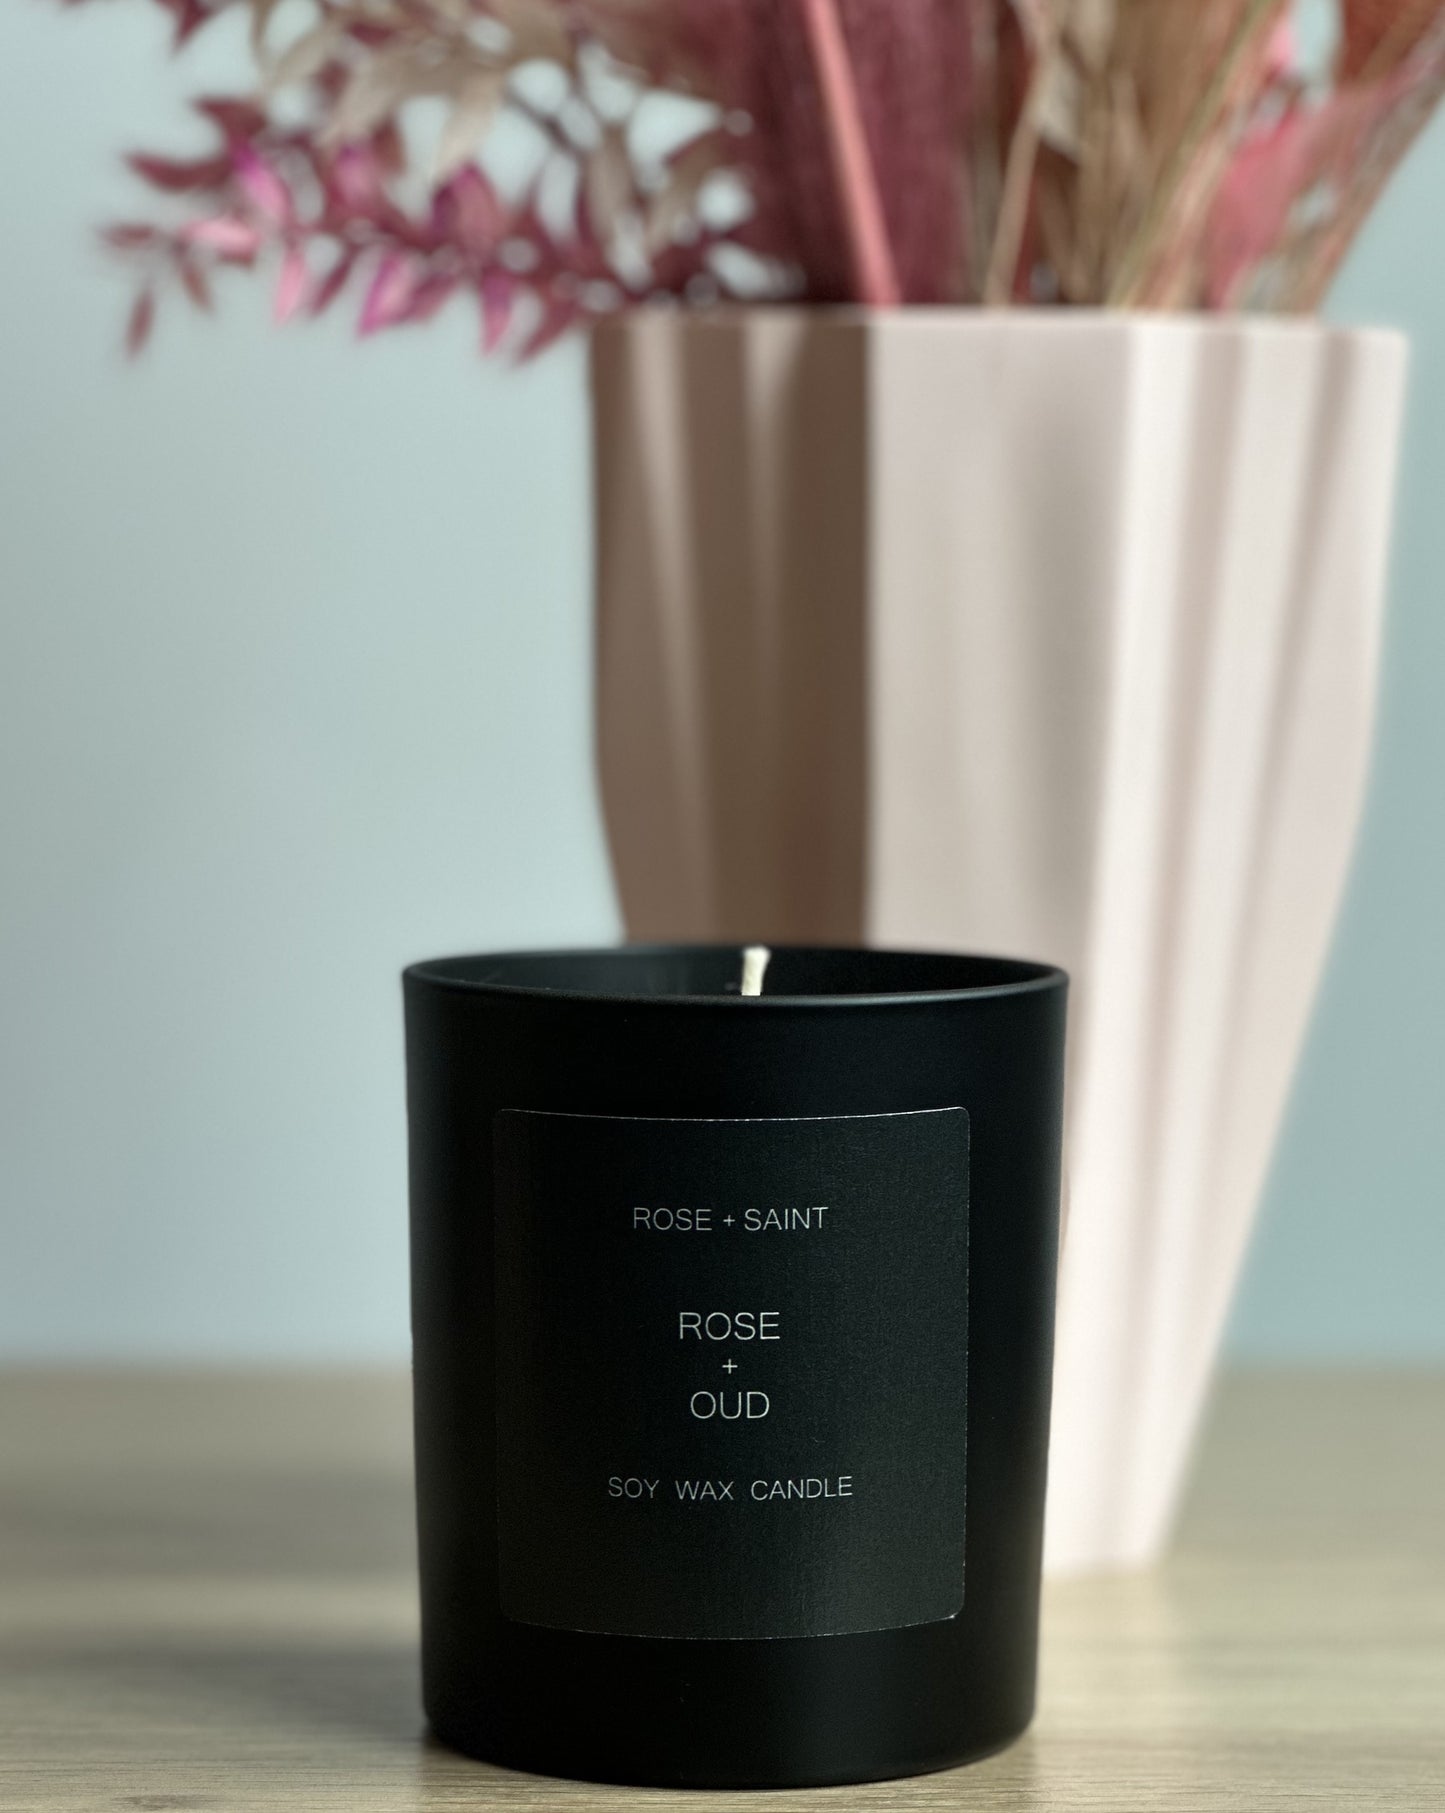 ROSE + OUD CANDLE